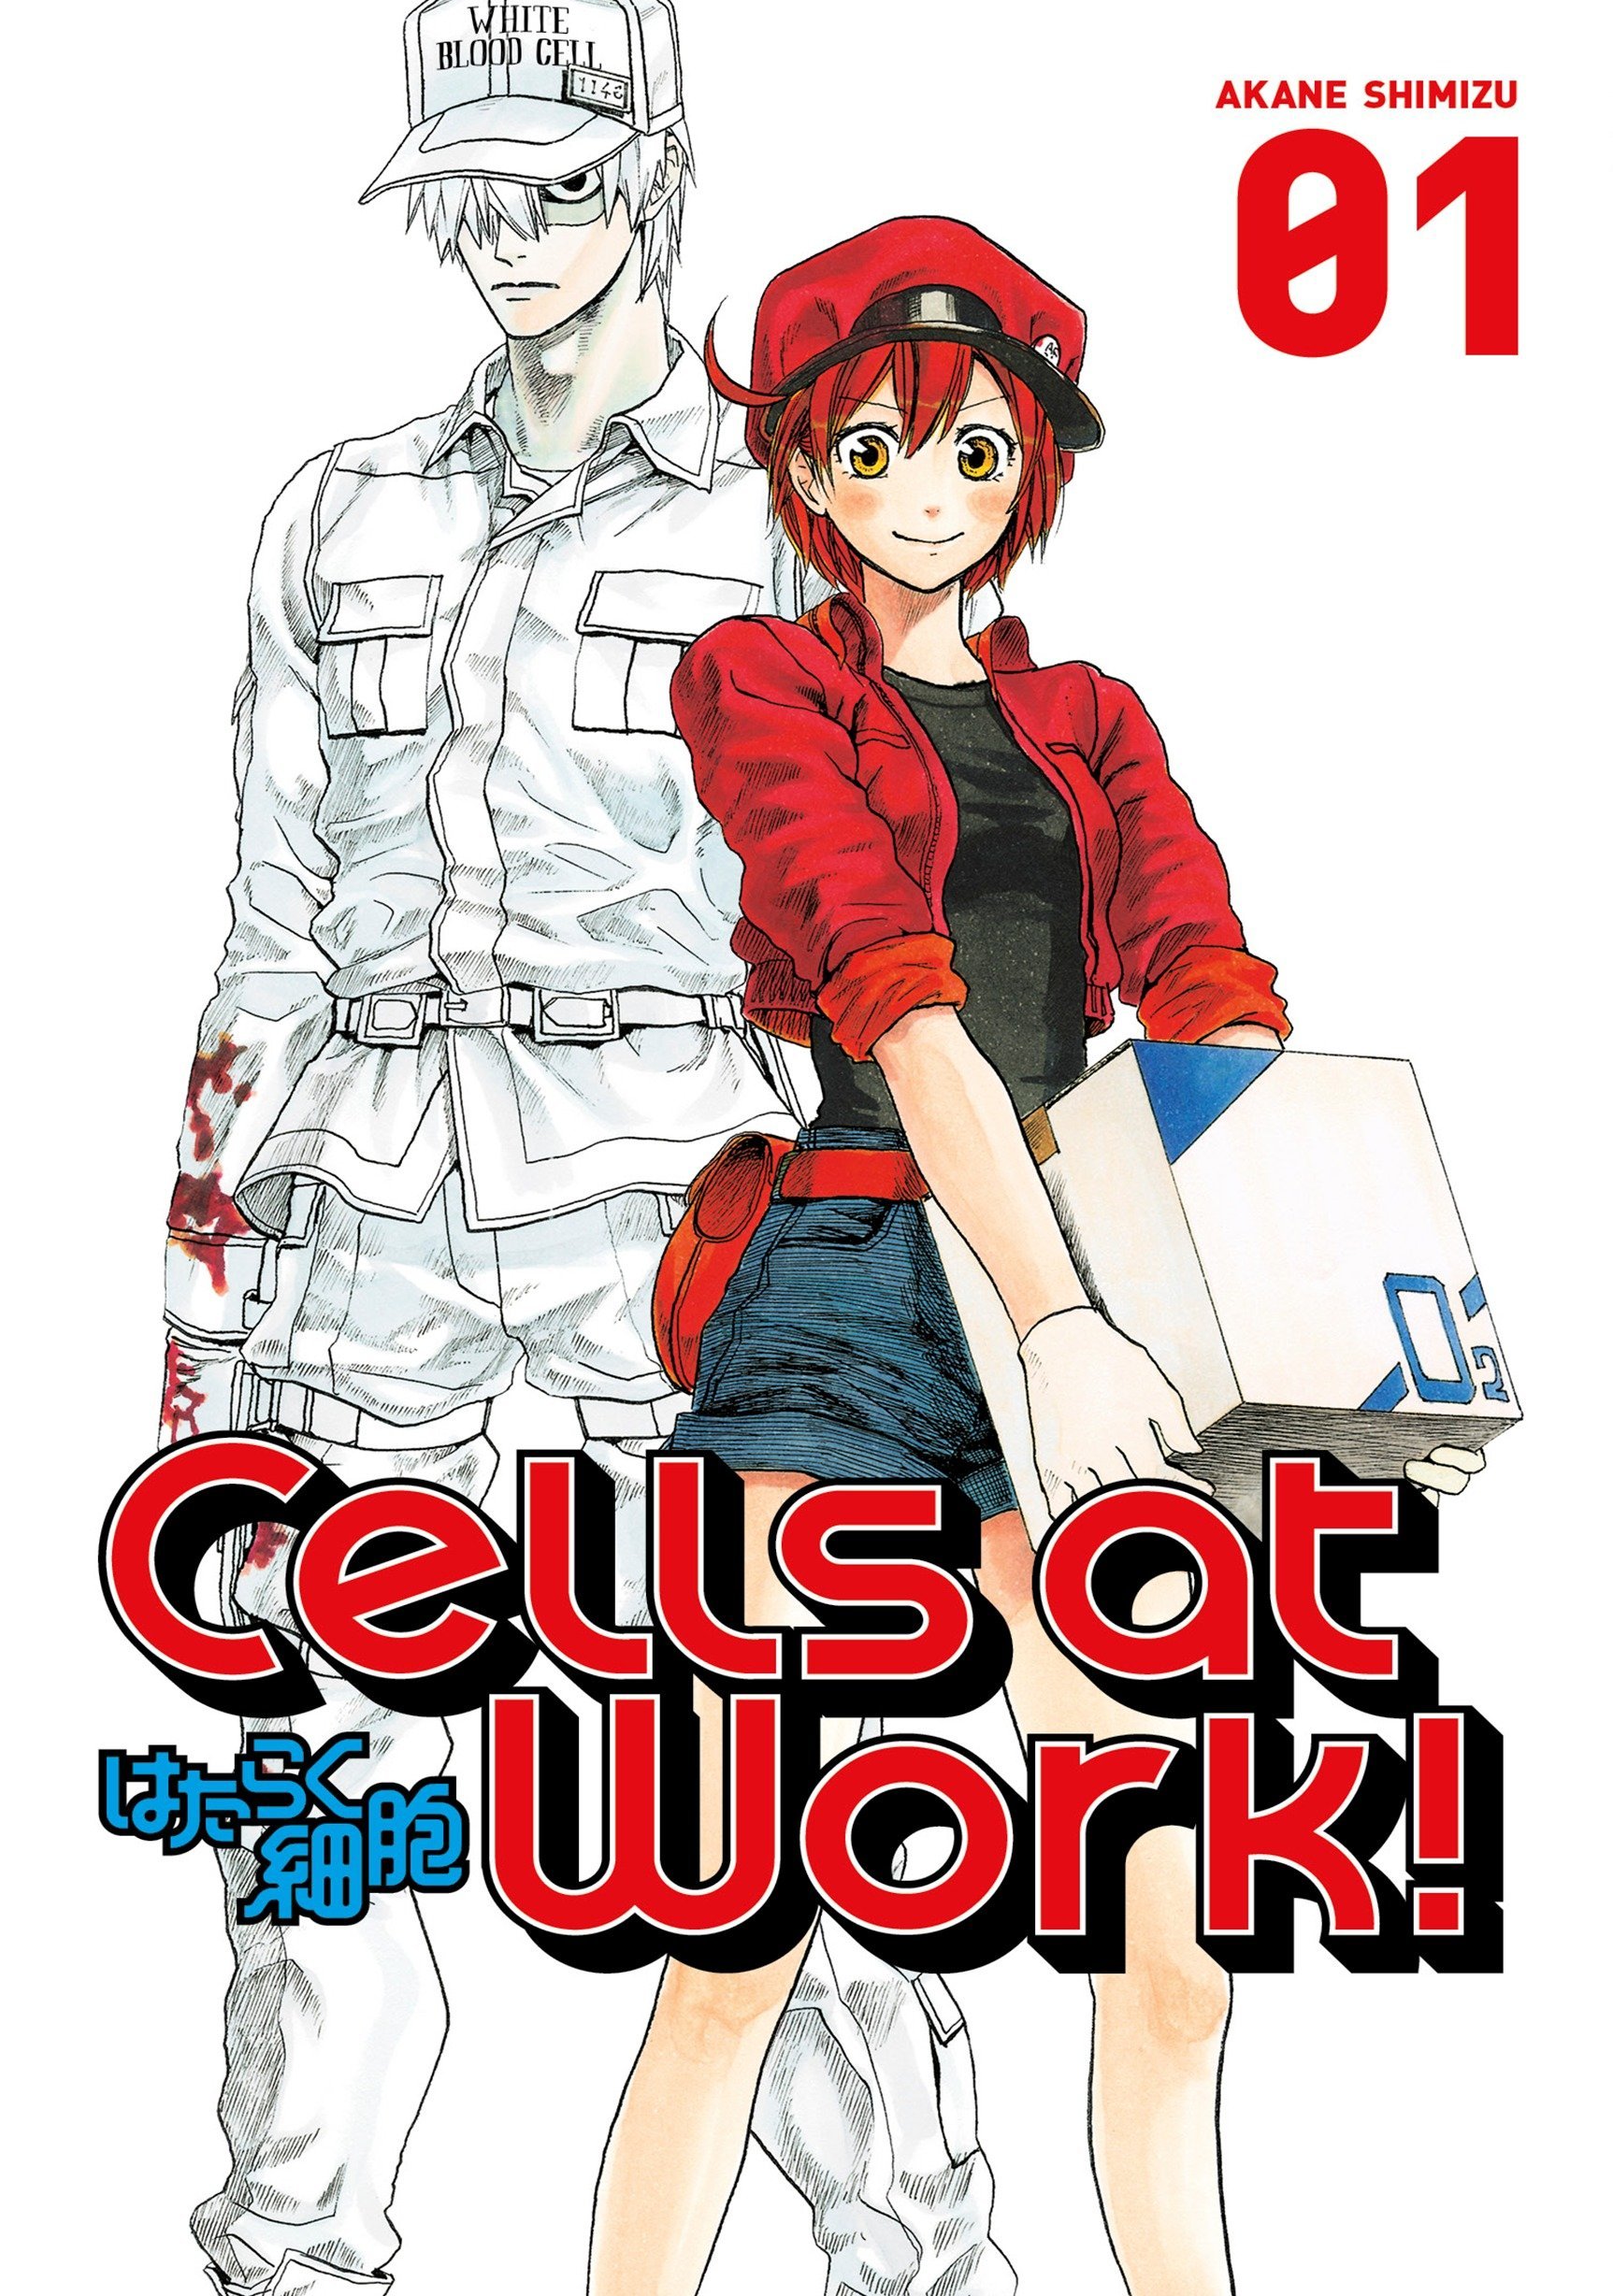 Cells at Work! - Wikipedia